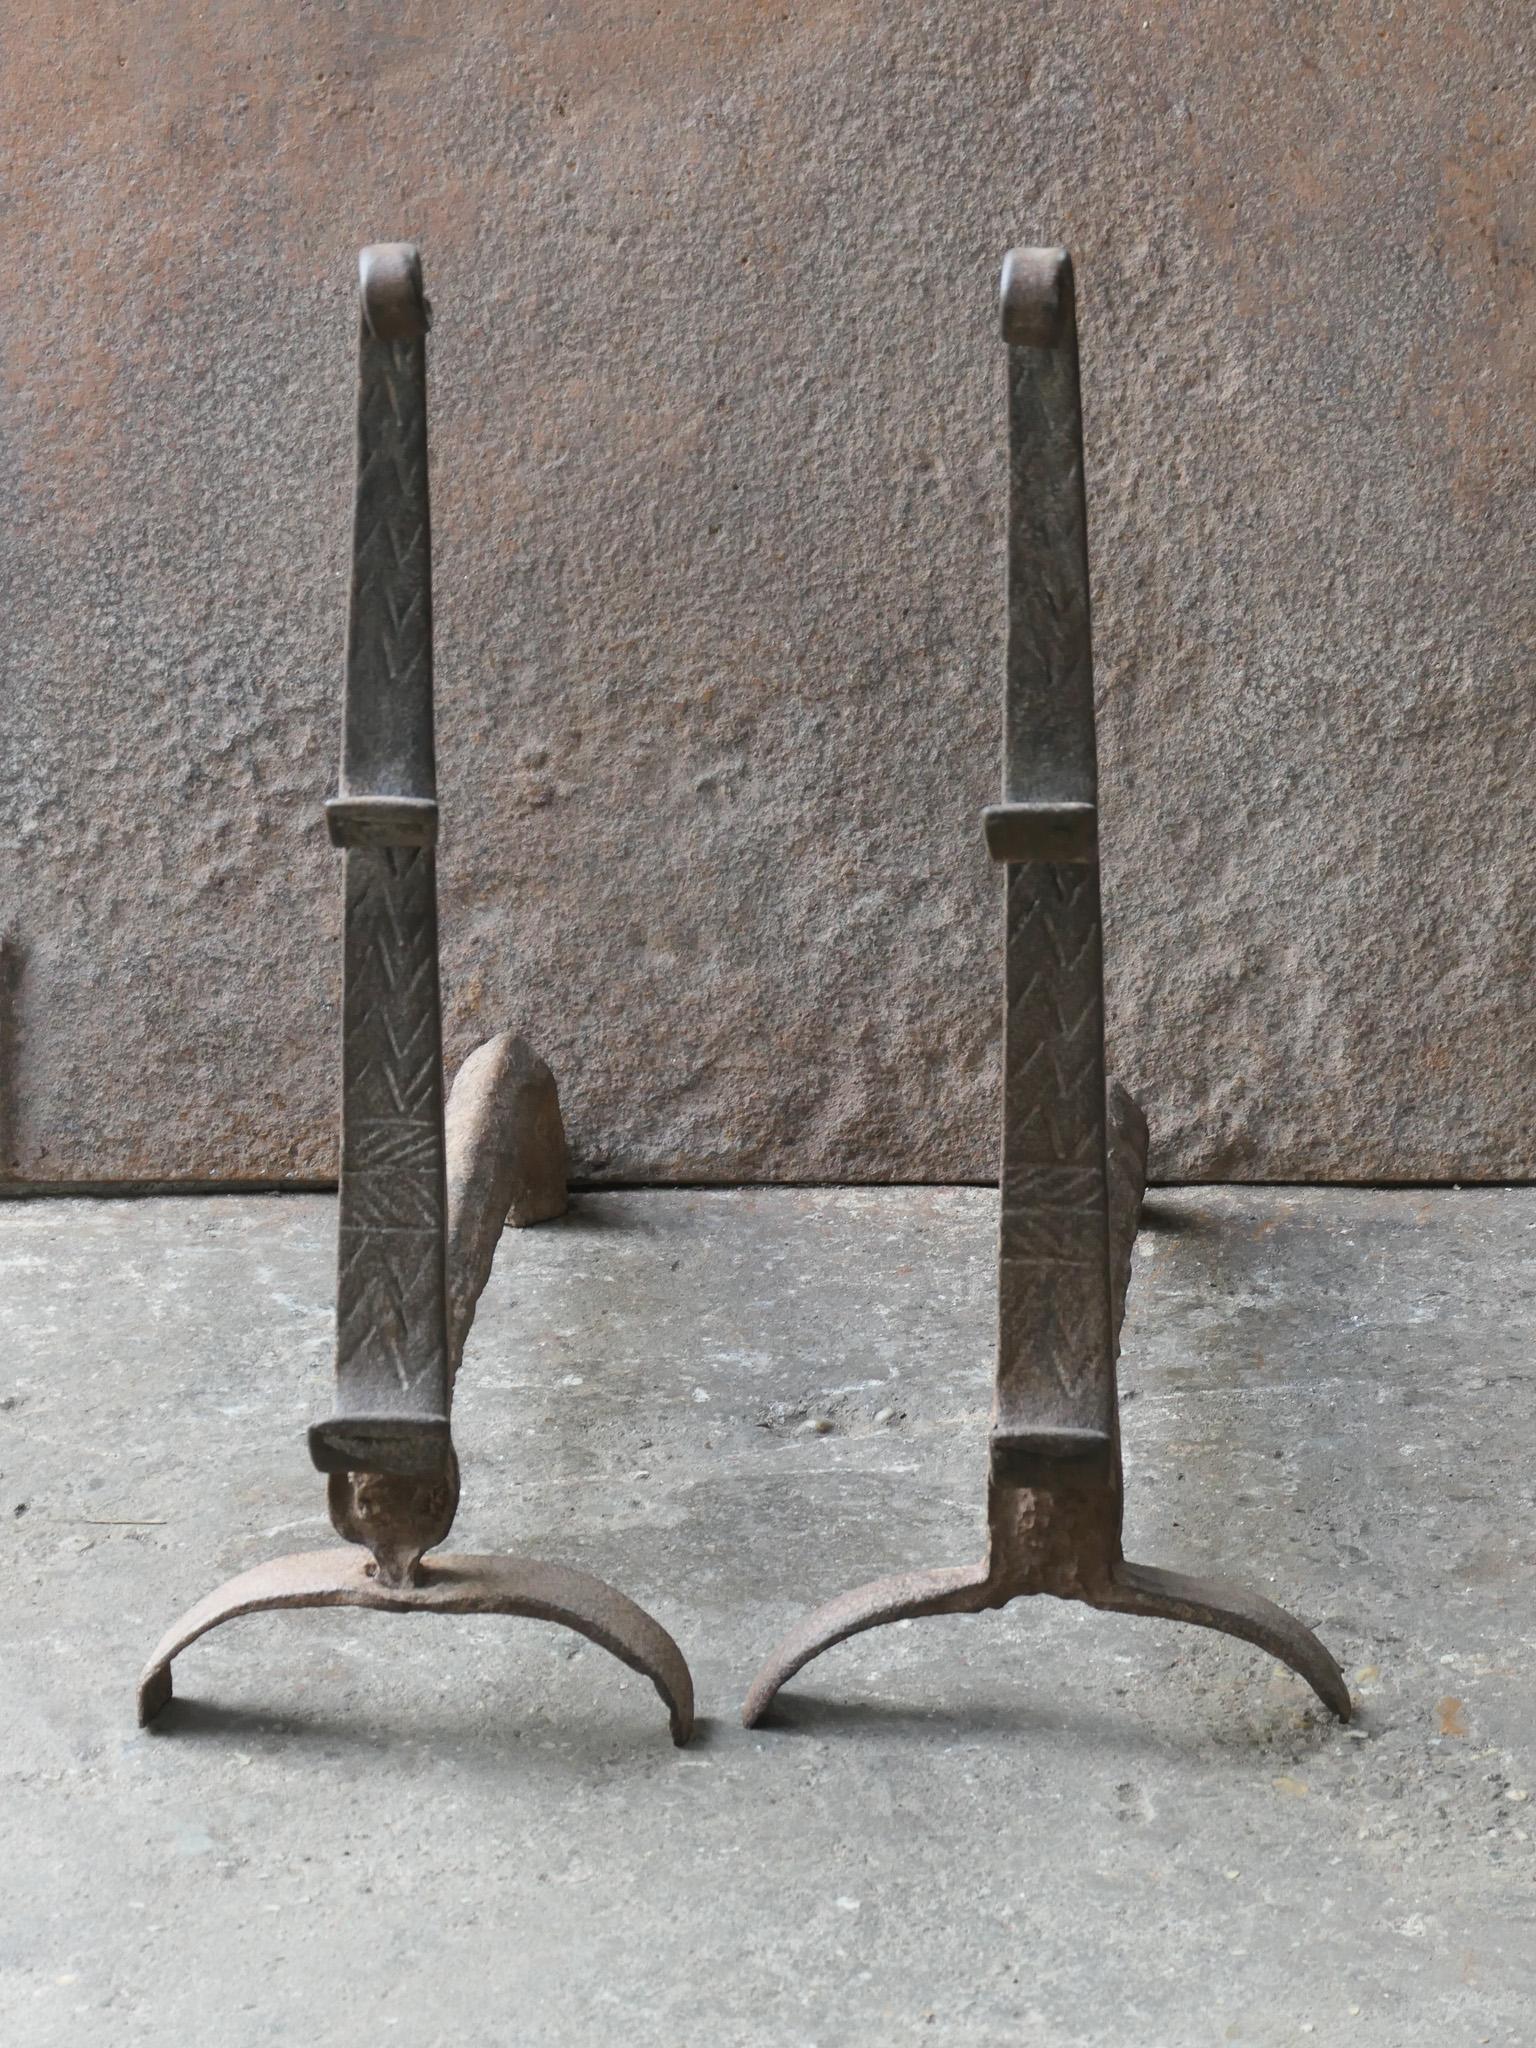 17th century French Louis XIII fire dogs with spit hooks. Made of wrought iron. These French andirons are called 'landiers' in France. This dates from the times the andirons were the main cooking equipment in the house. They had spit hooks to grill